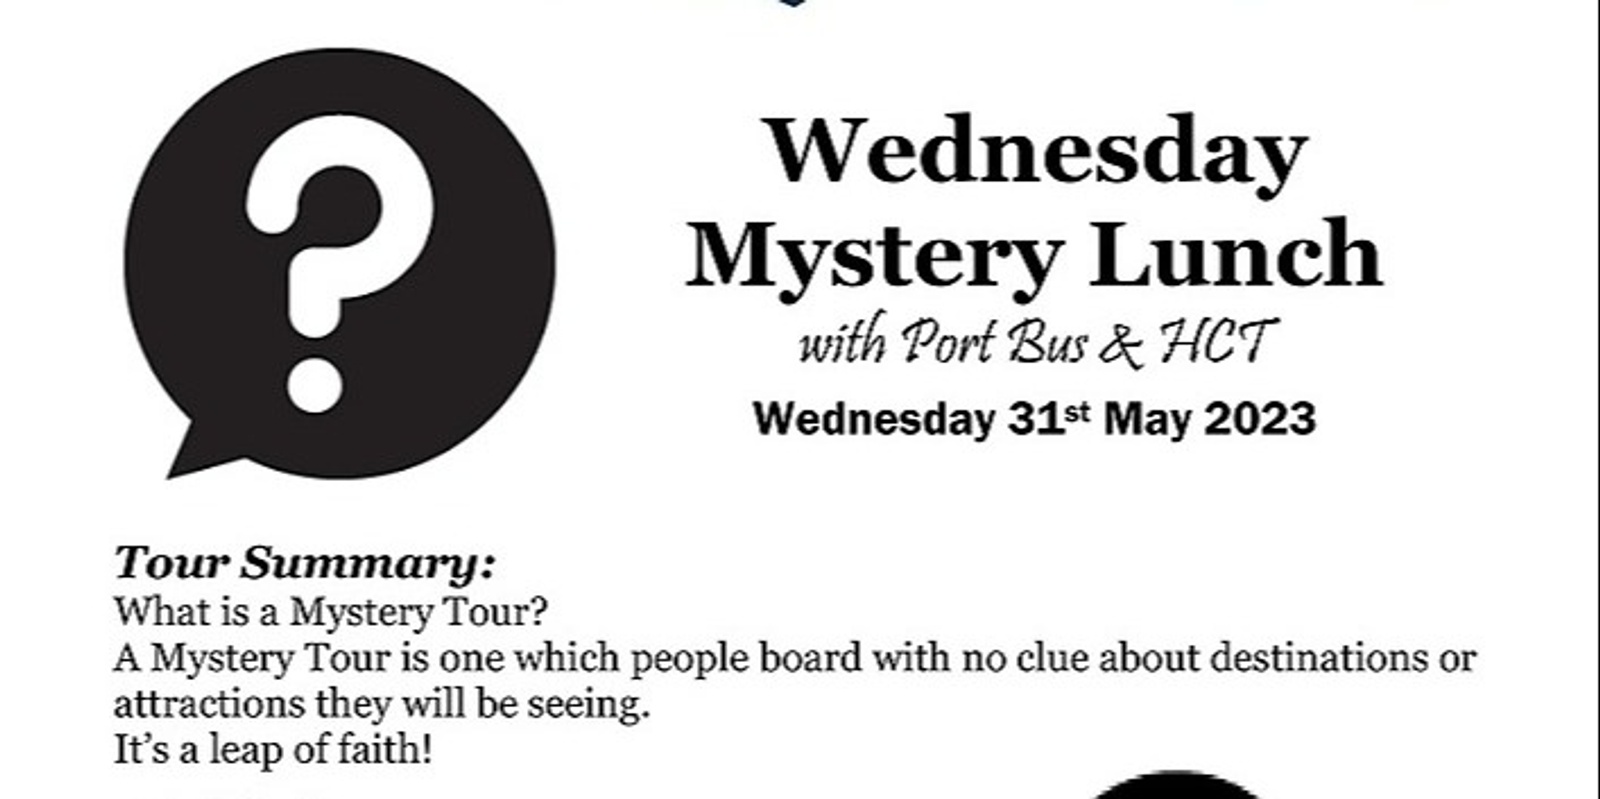 Wednesday Mystery Lunch